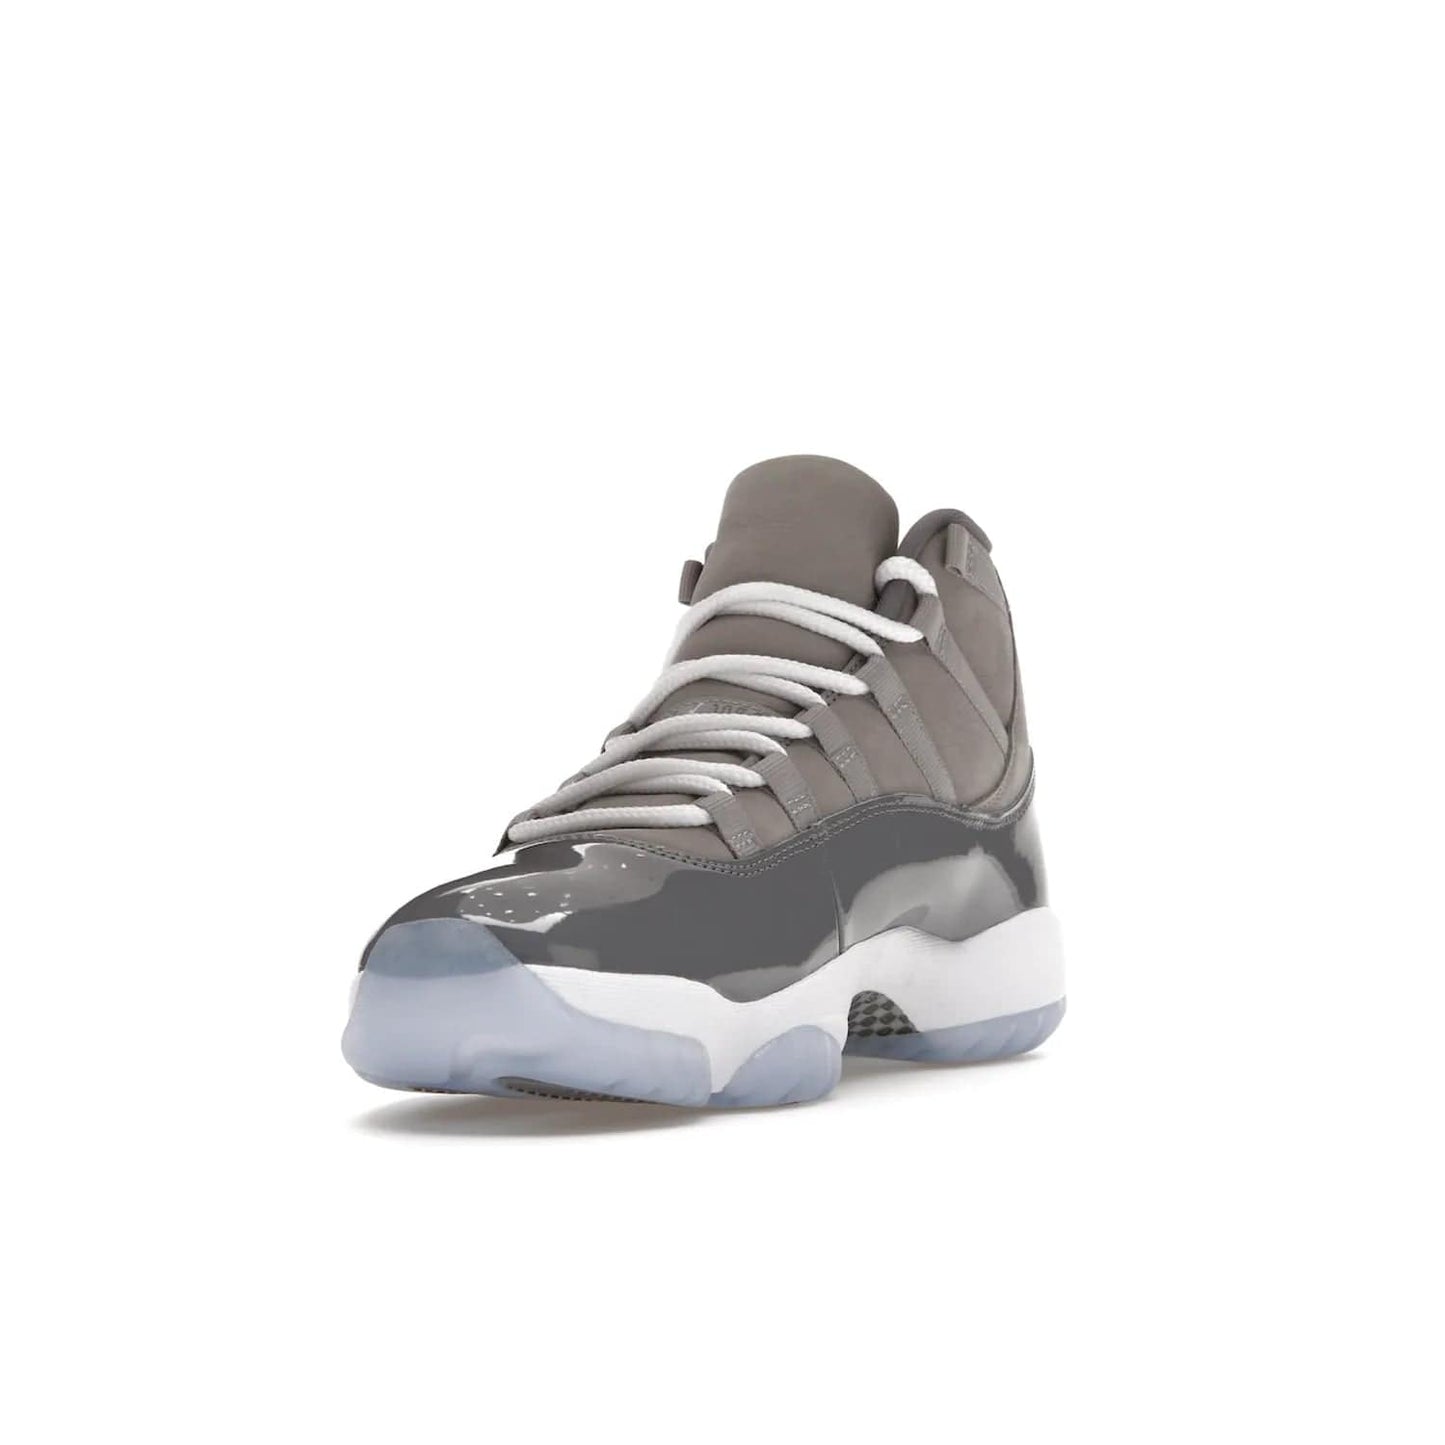 Jordan 11 Retro Cool Grey (2021) - Image 13 - Only at www.BallersClubKickz.com - Shop the Air Jordan 11 Retro Cool Grey (2021) for a must-have sneaker with a Cool Grey Durabuck upper, patent leather overlays, signature Jumpman embroidery, a white midsole, icy blue translucent outsole, and Multi-Color accents.  Released in December 2021 for $225.